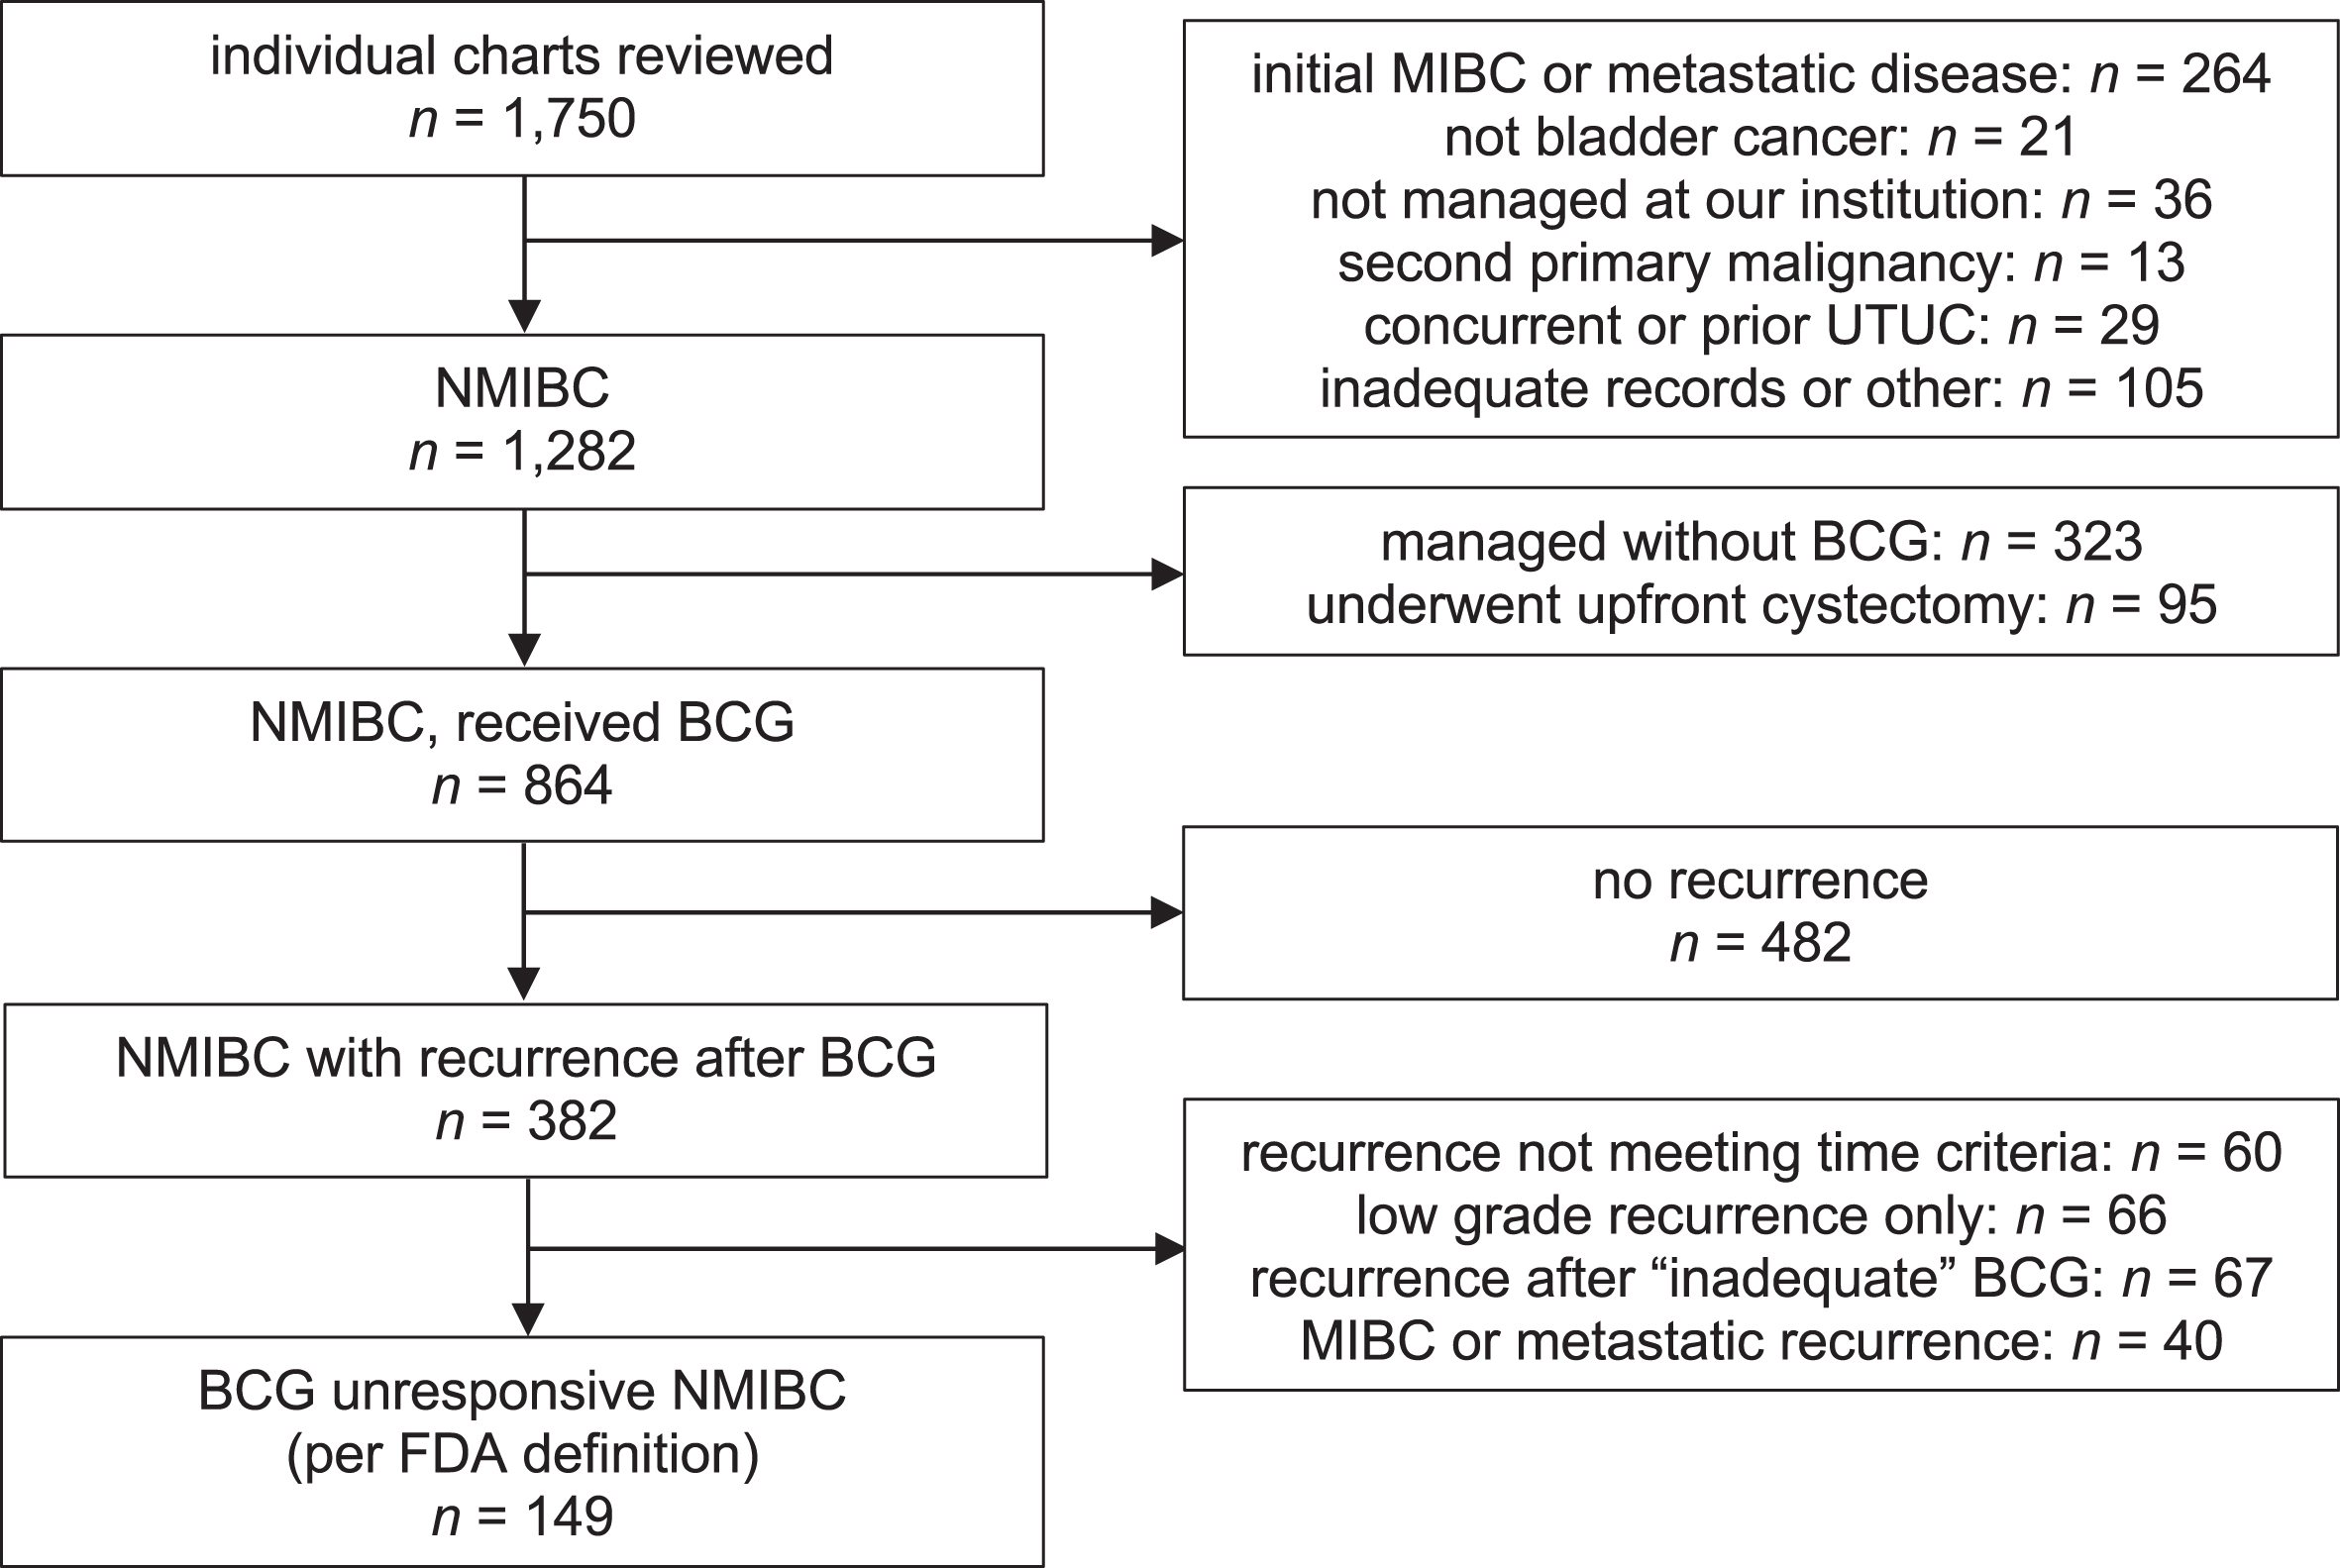 Patients included in the study. “Inadequate” BCG was defined as less than 5/6 doses of an induction or reinduction course and less than 2/3 doses of a maintenance course. Abbreviations: BCG, bacille Calmette-Guérin; MIBC, muscle-invasive bladder cancer; NMIBC, non-muscle invasive bladder cancer; UTUC, upper tract urothelial carcinoma; XRT, radiation therapy.